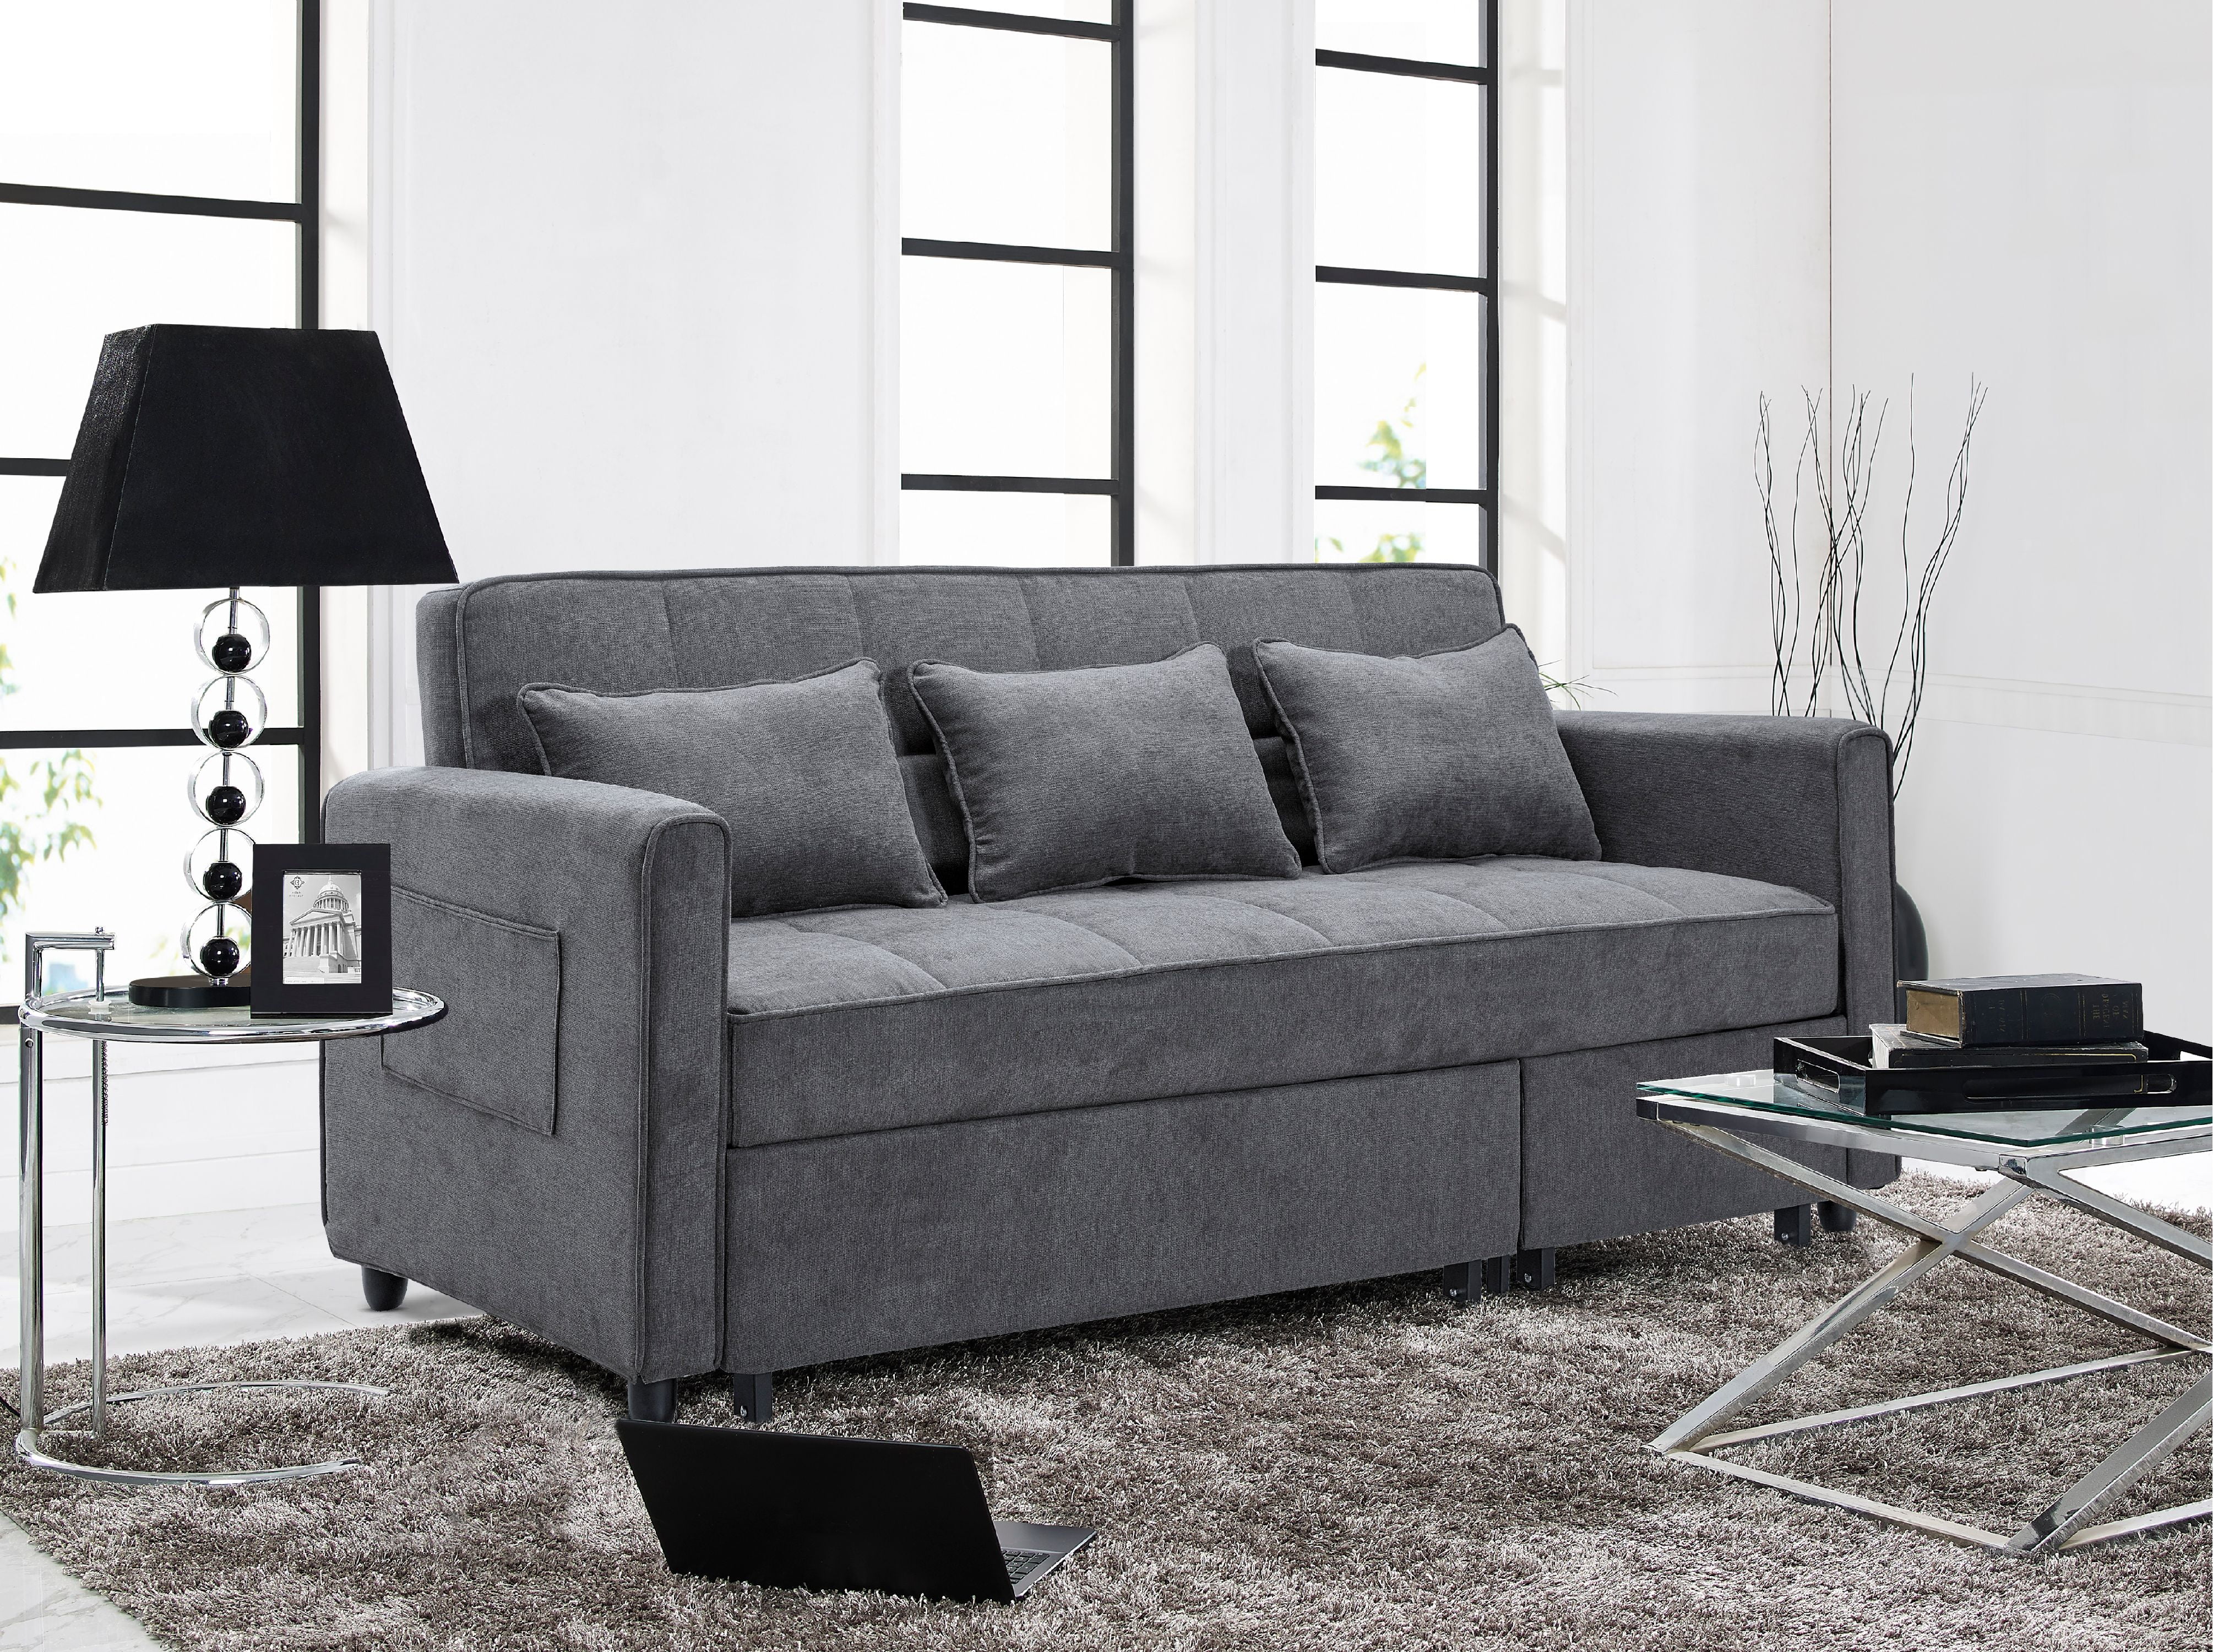 relax-a-lounger hinton king sofa bed